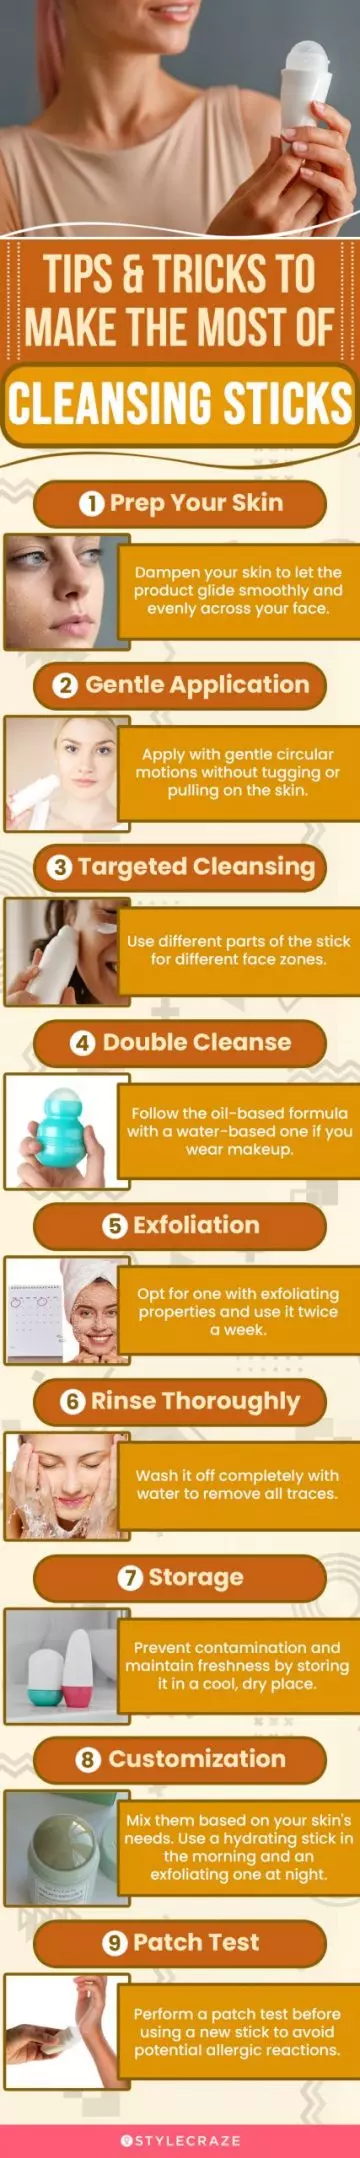 Tips & Tricks To Make The Most Of Cleansing Sticks (infographic)